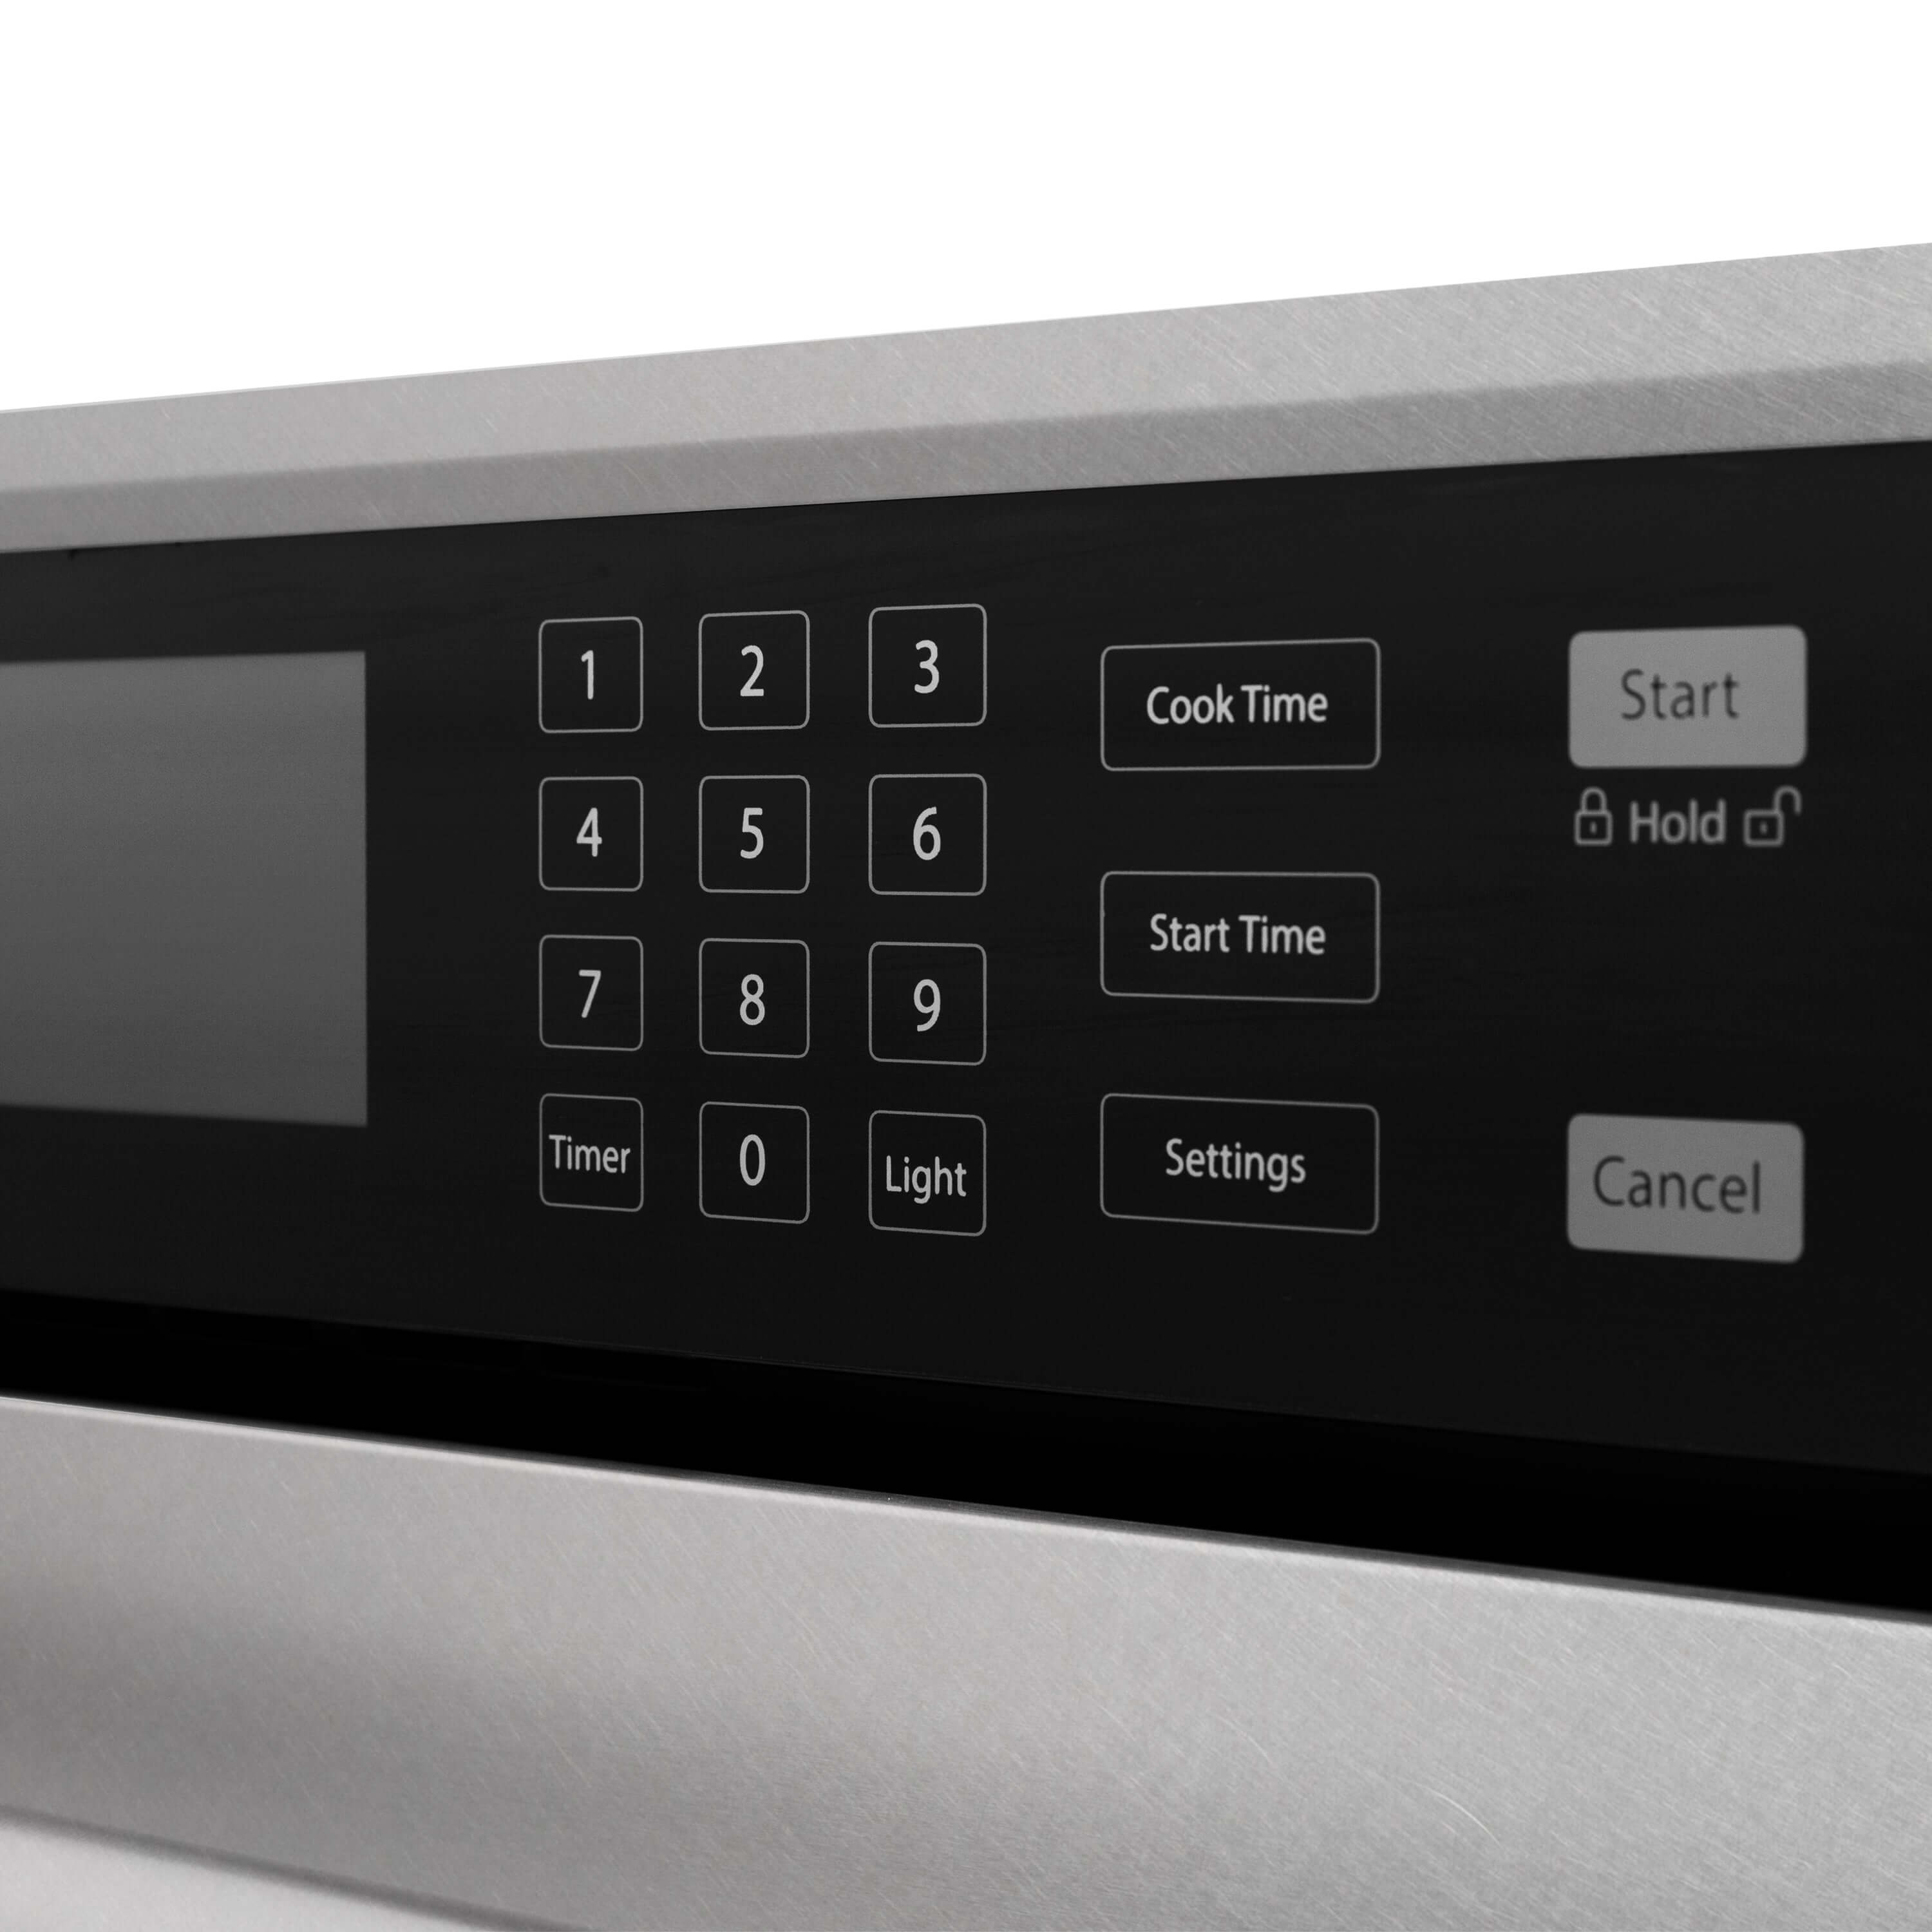 ZLINE 30 in. Single Wall Oven button control panel.